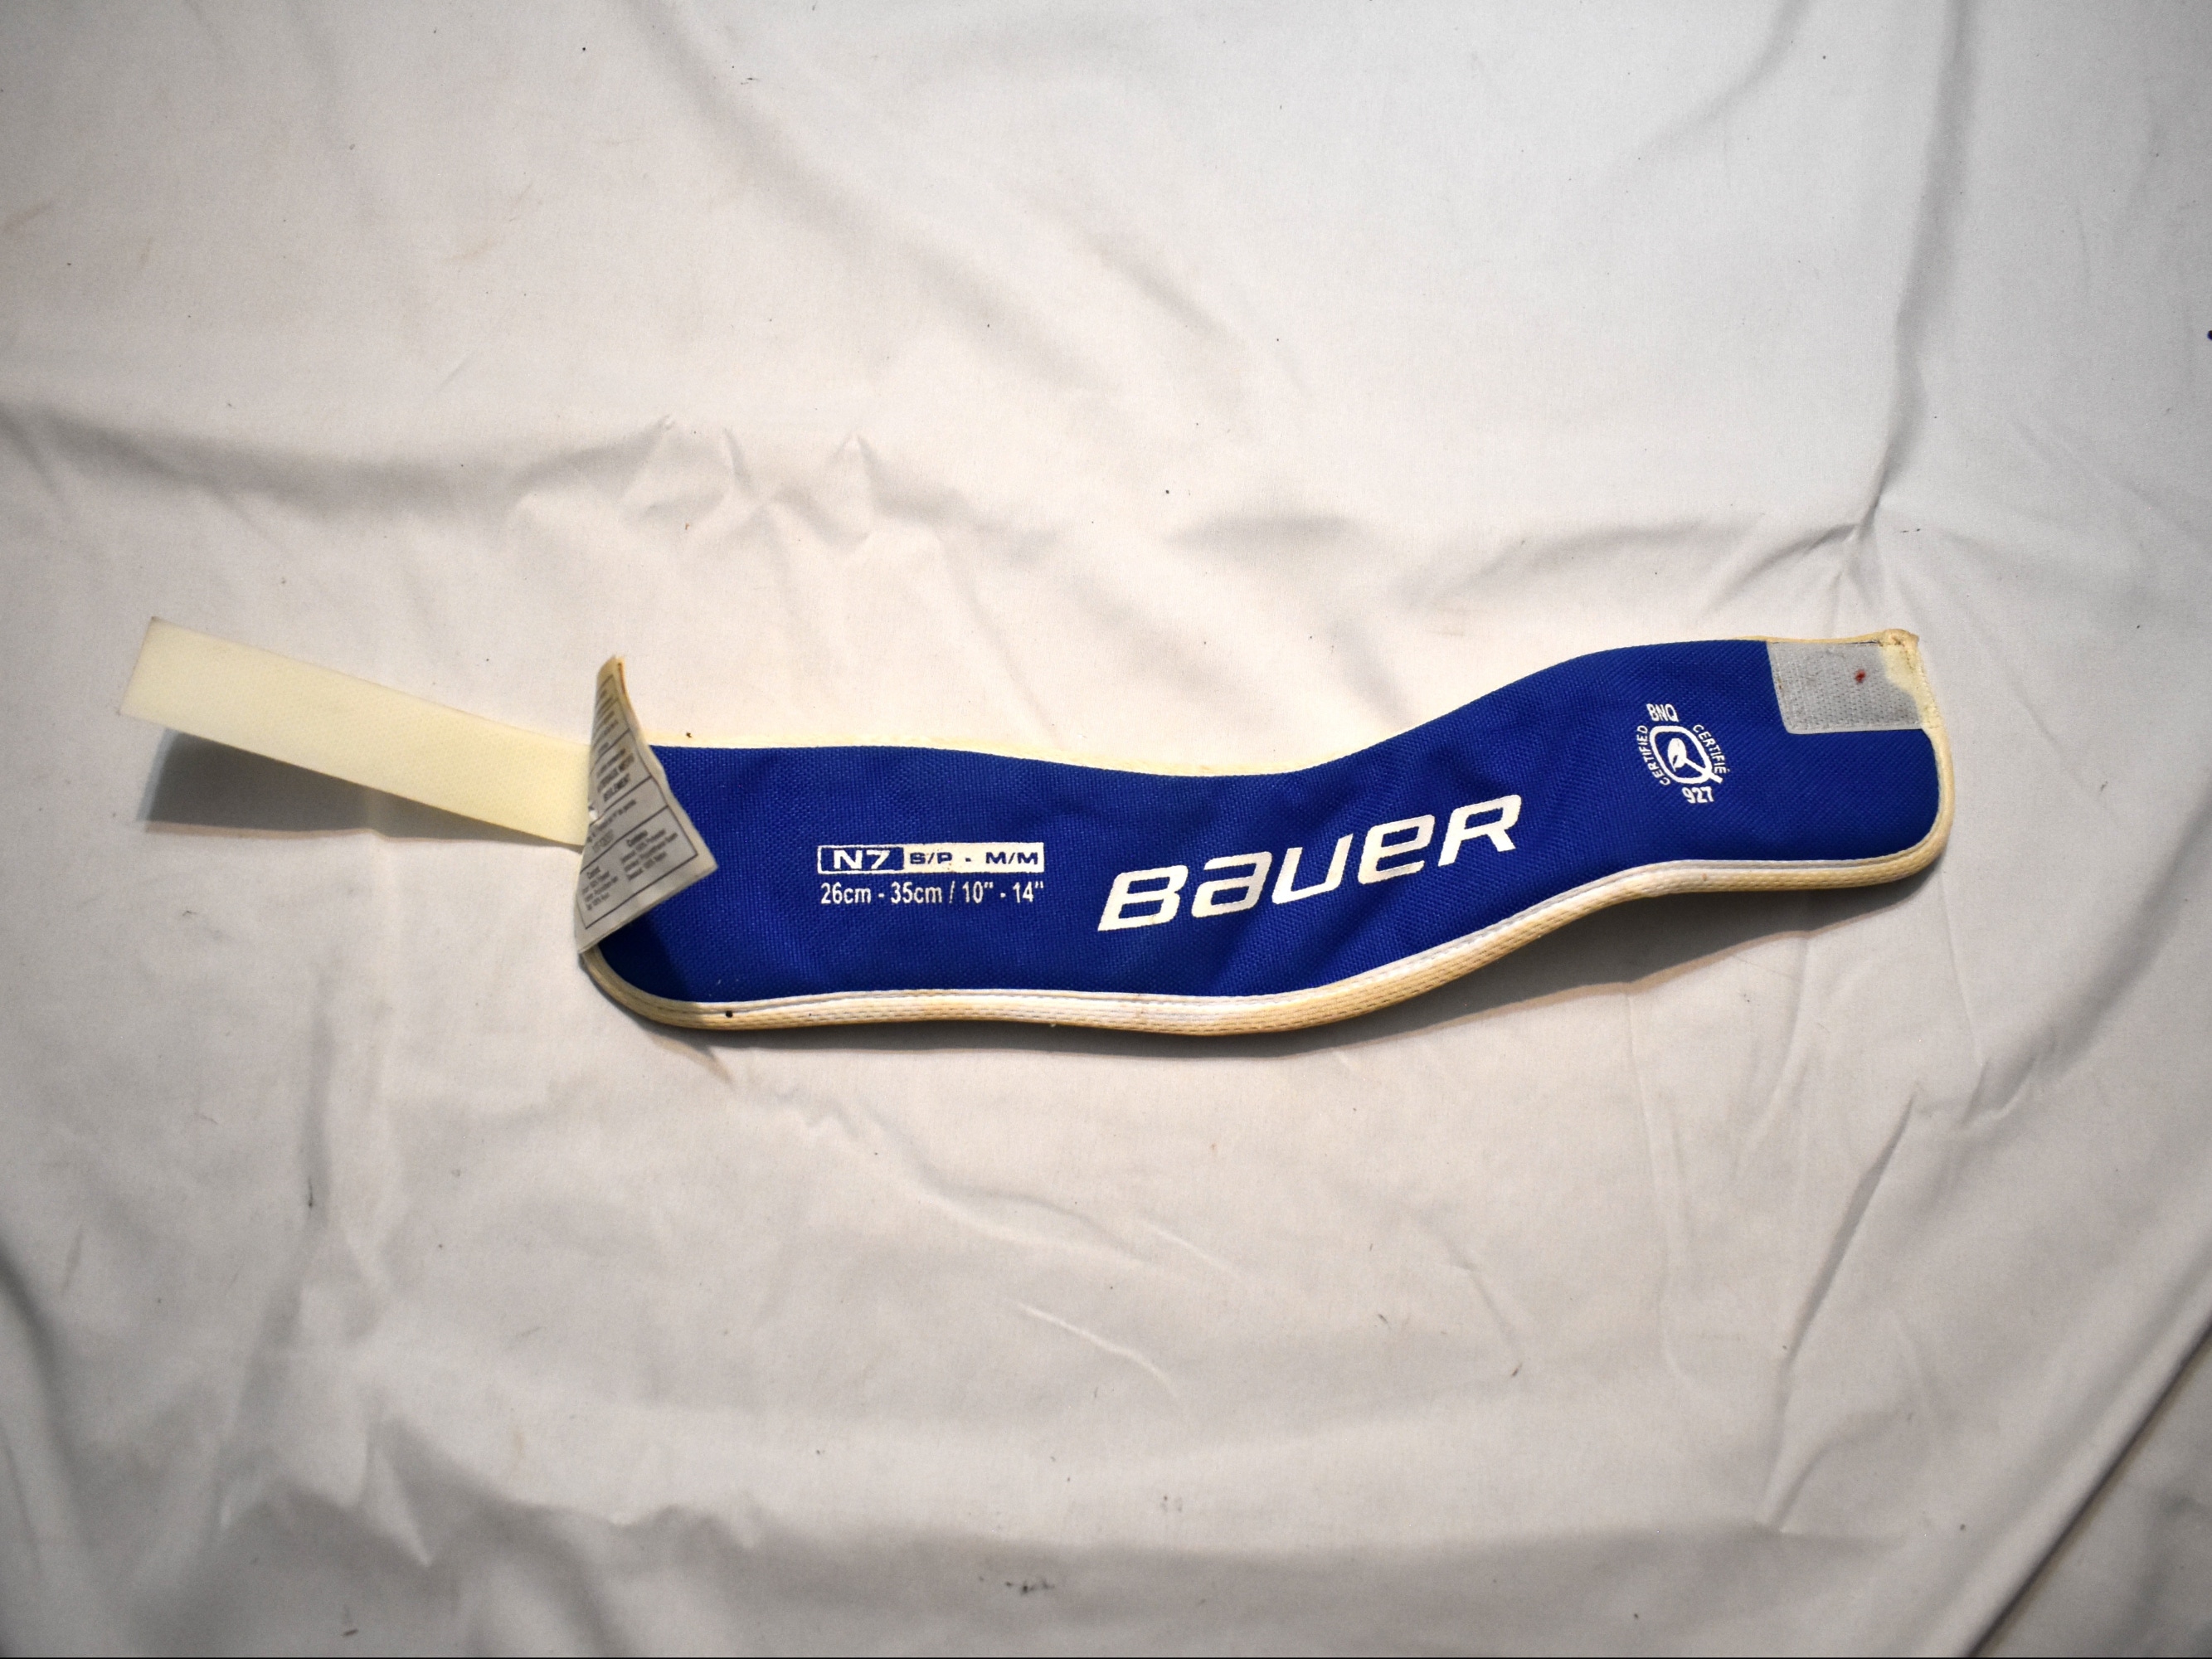 Bauer N7 Hockey Neck Throat Guard, Blue, (S-M) 10-14 inches